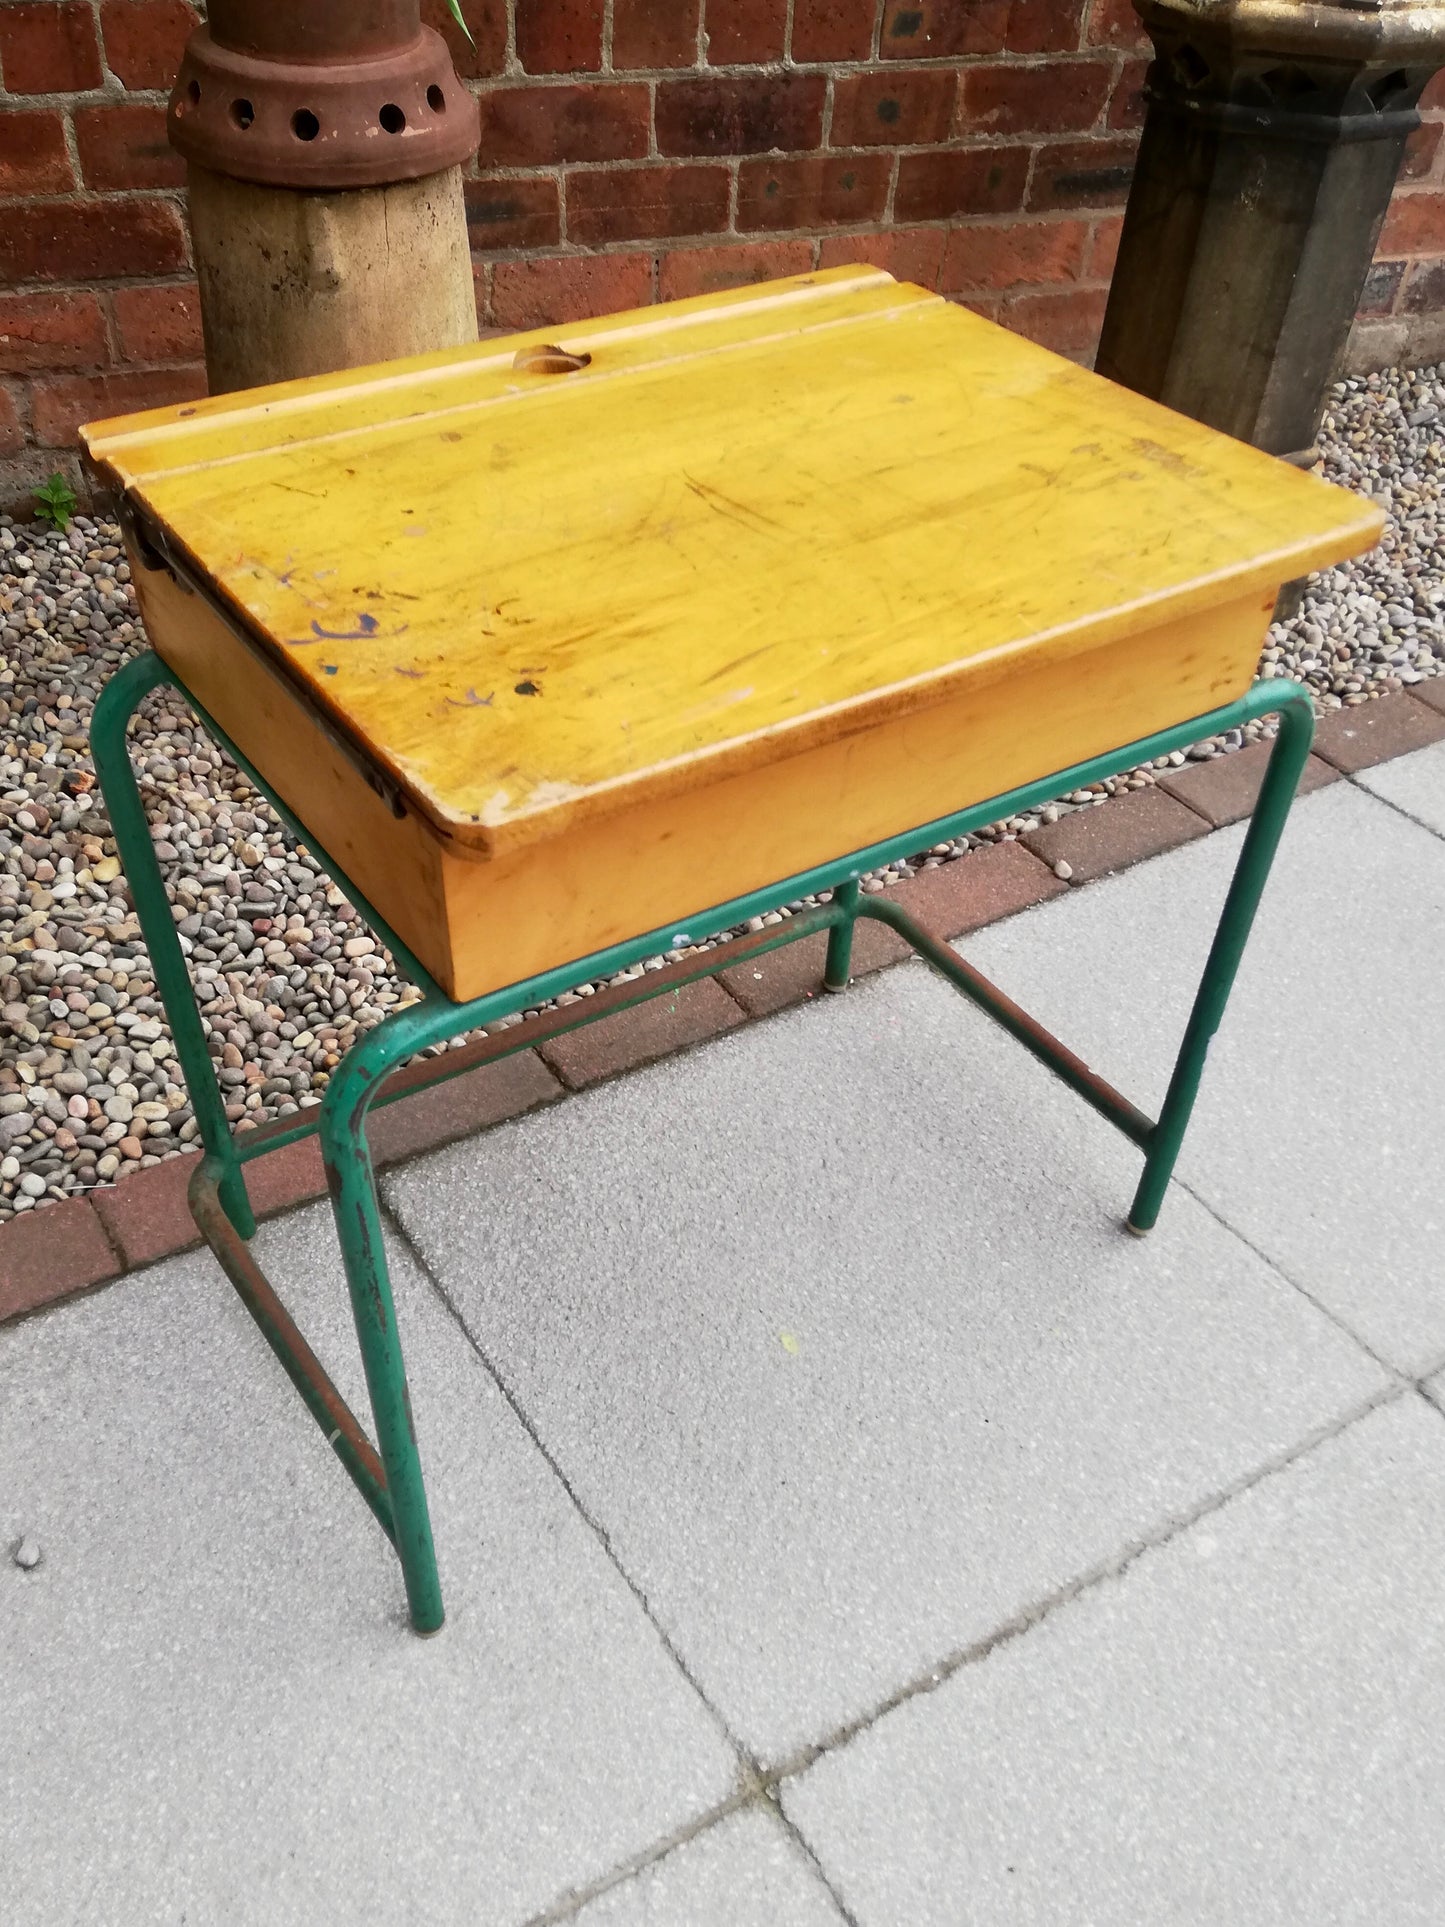 Vintage children's school desk with metal legs - can also be upcycled